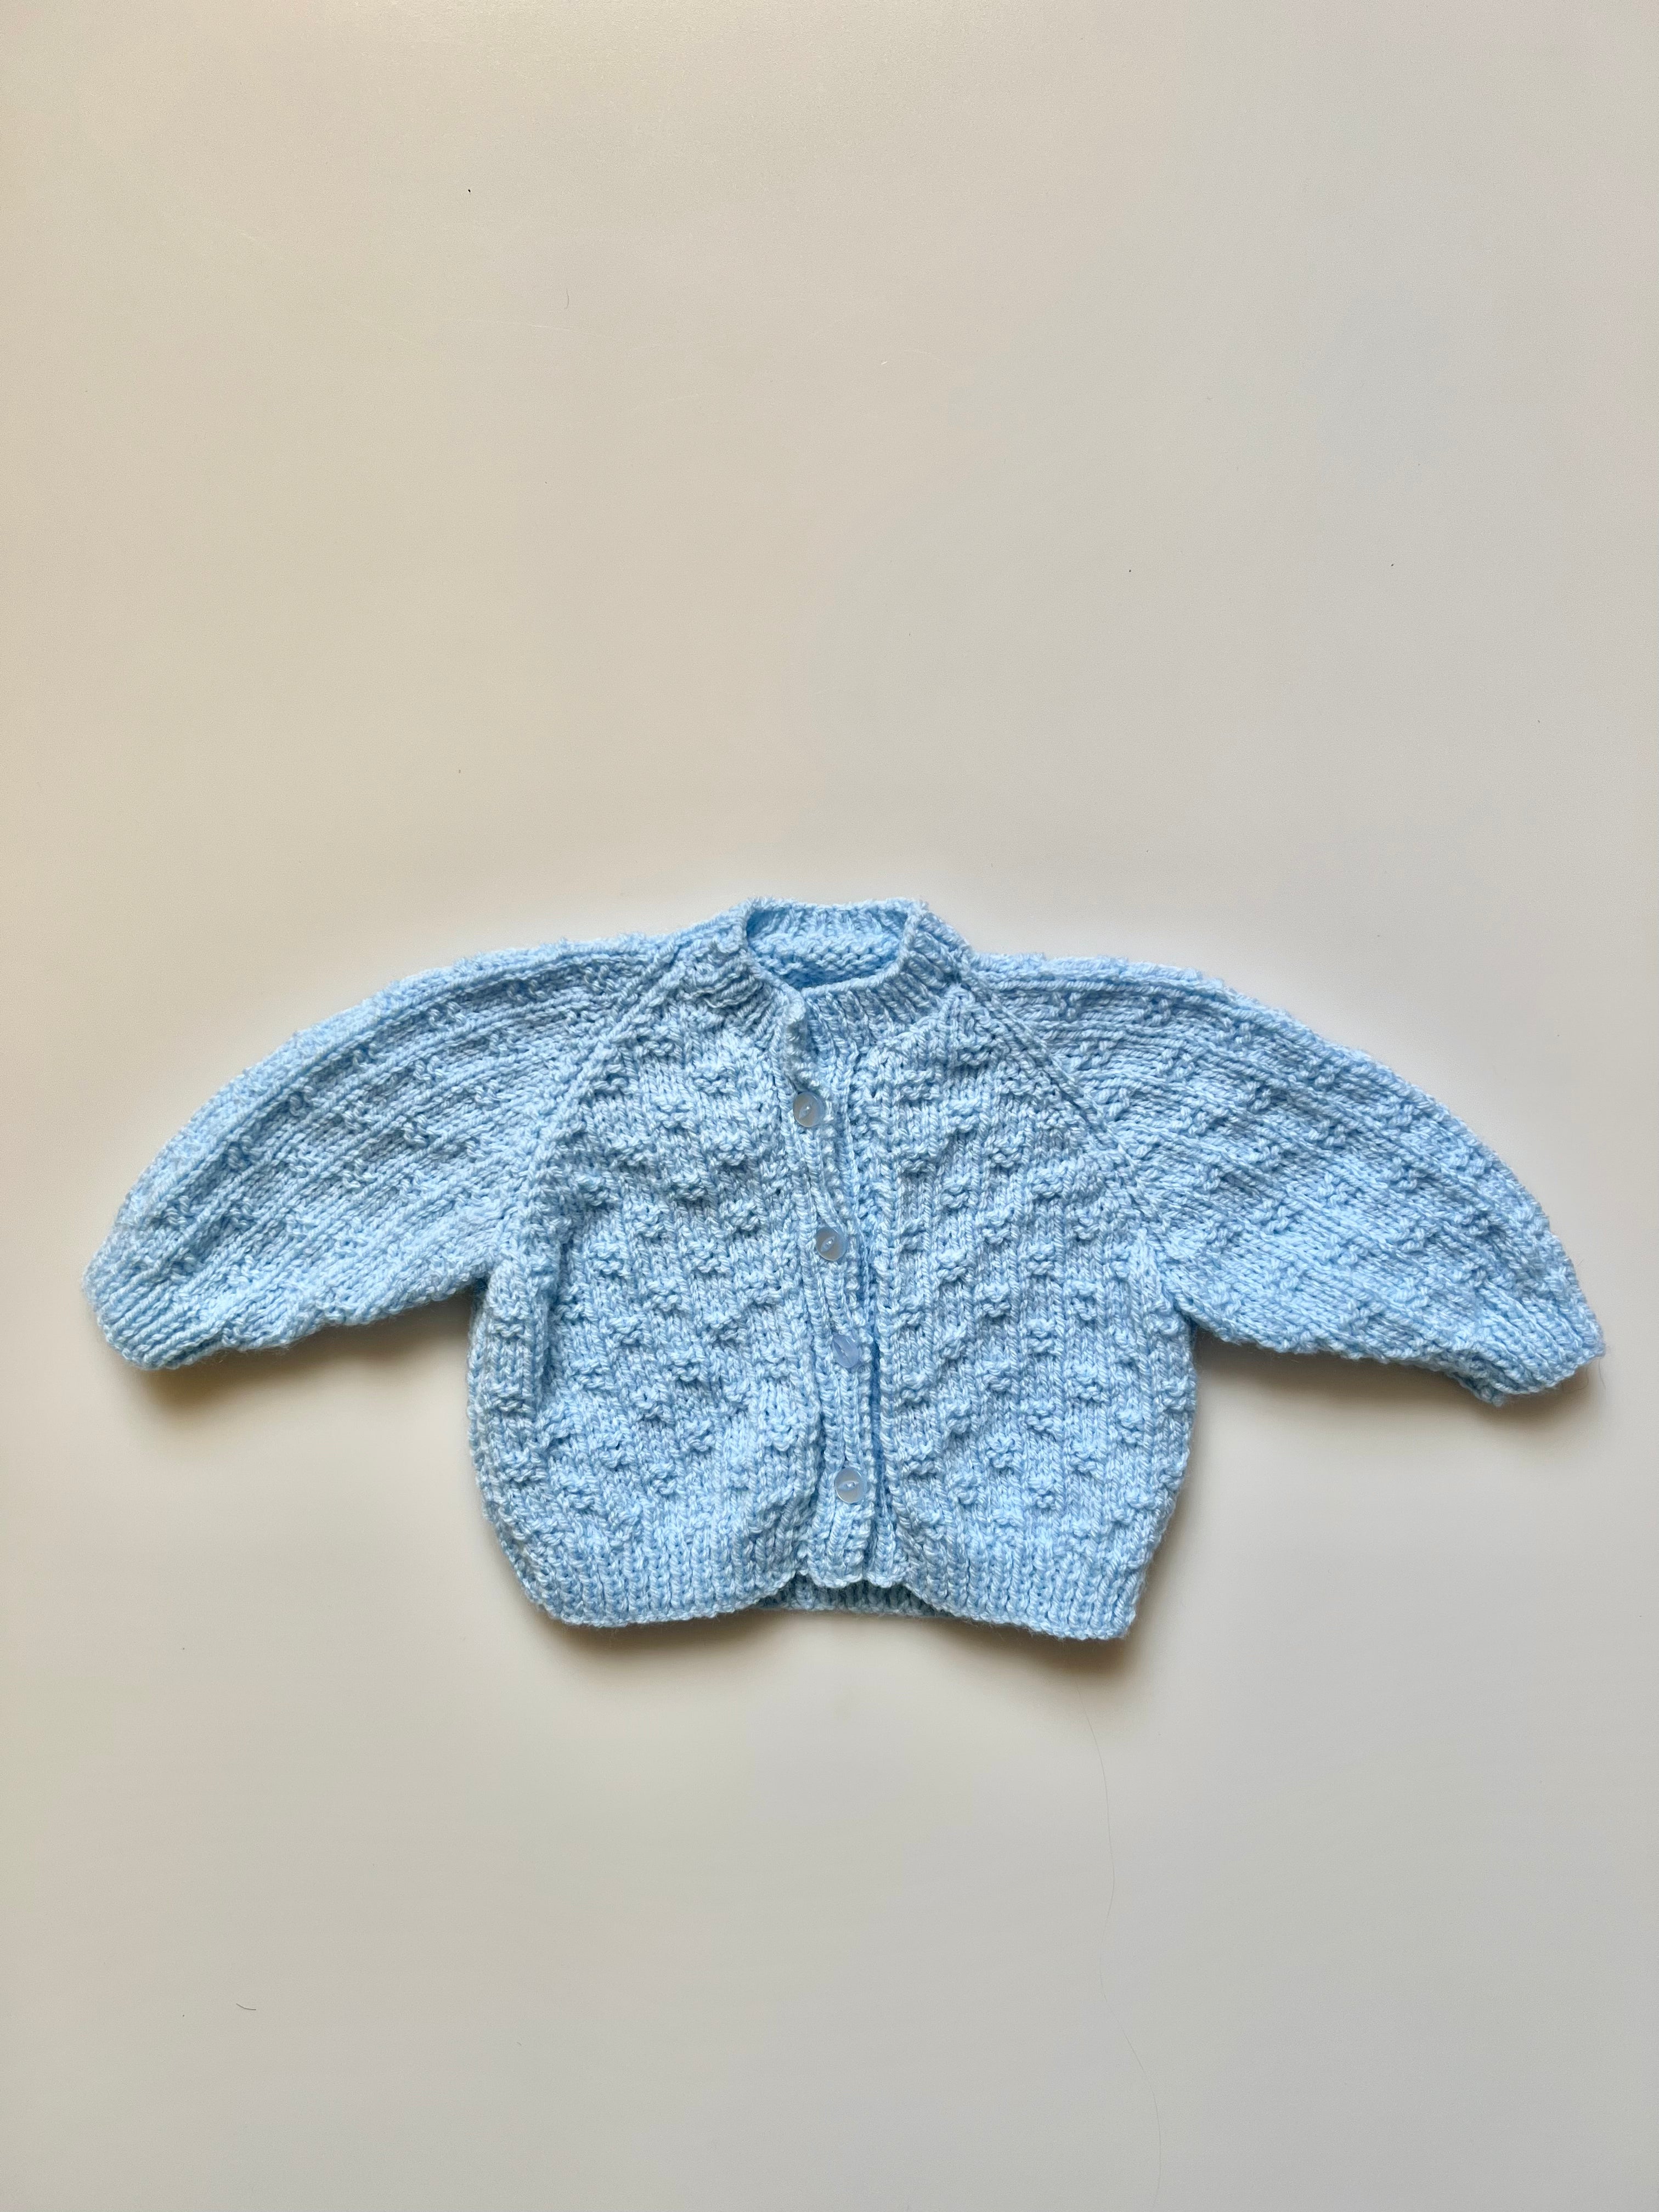 Hand Knitted Sky Blue Cardigan 3-6 Months